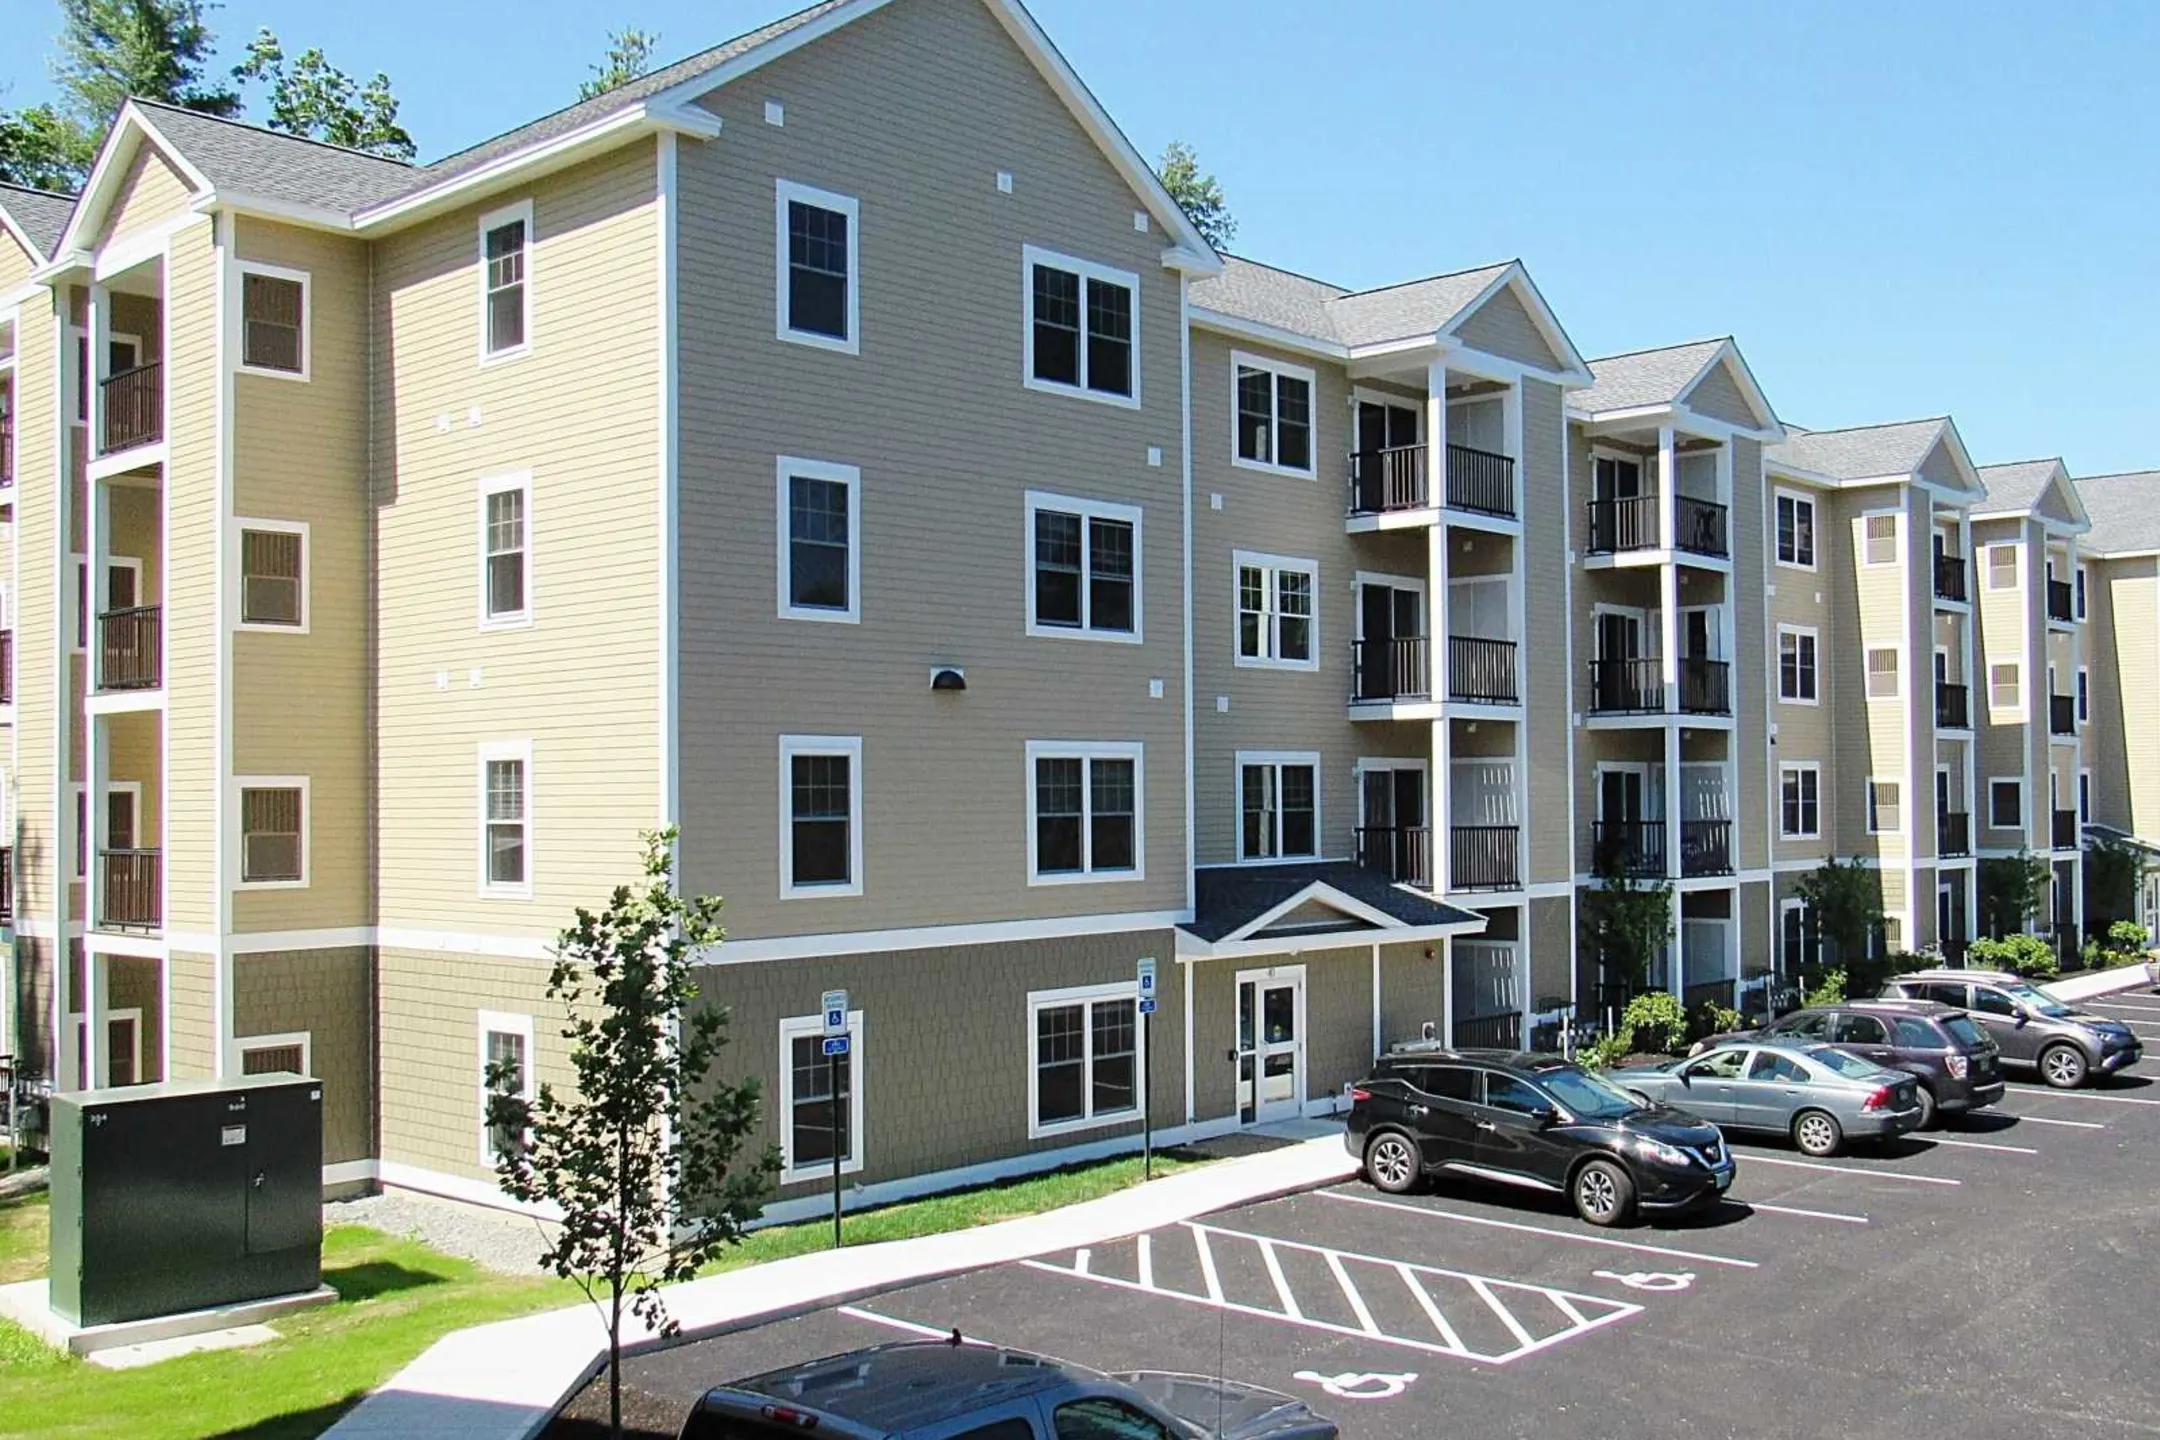 Building - The Residences at Colcord Pond - Exeter, NH